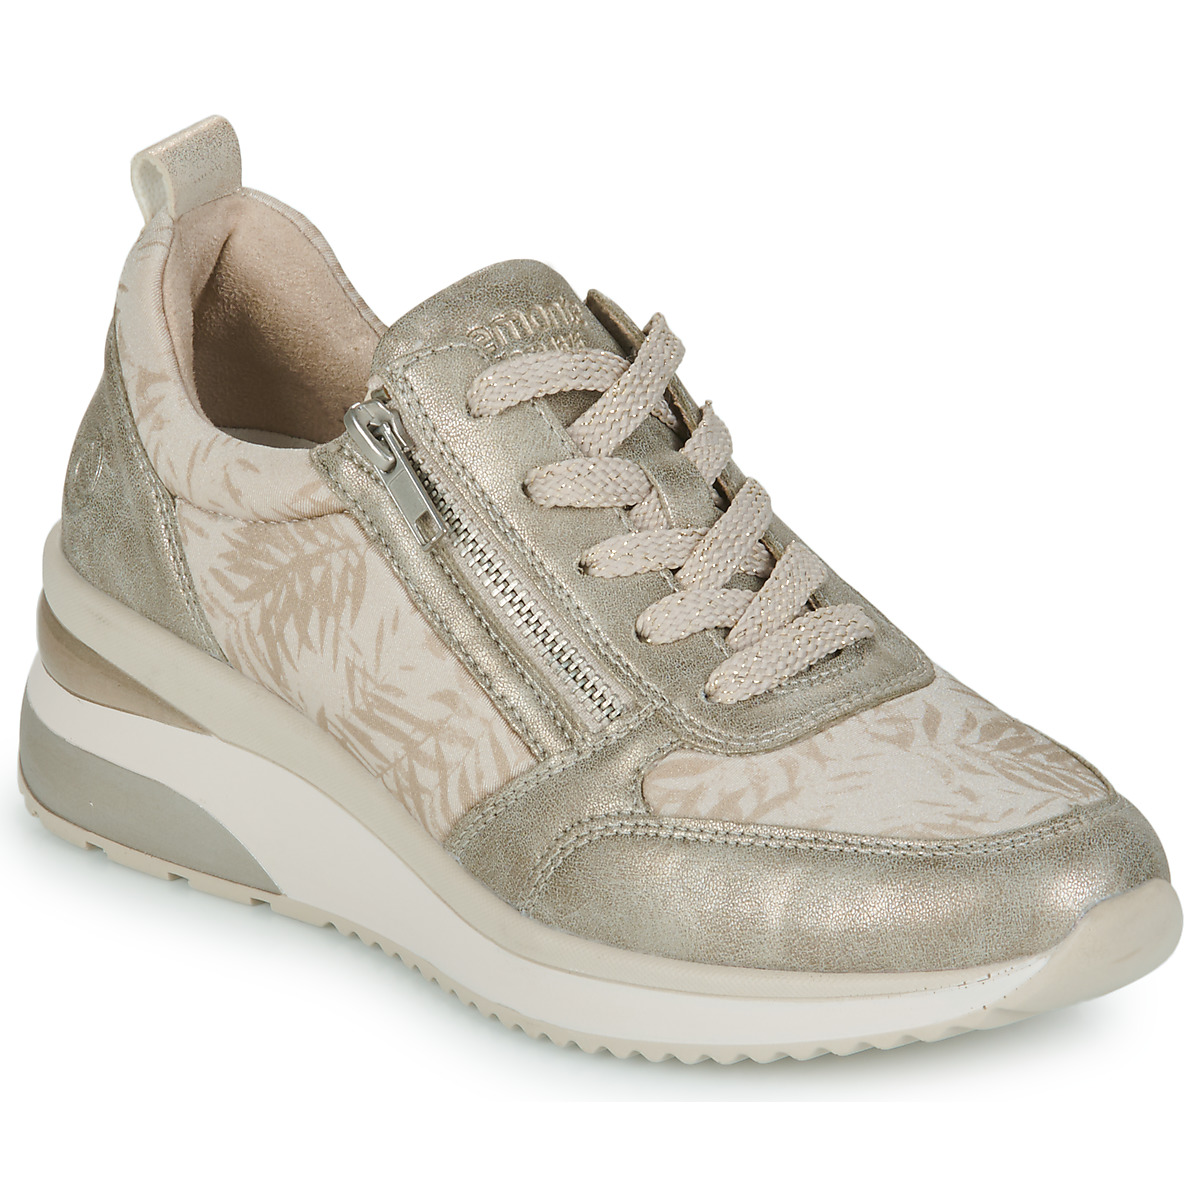 Shoes Women Low top trainers Remonte Dorndorf D2401-62 Taupe / Beige